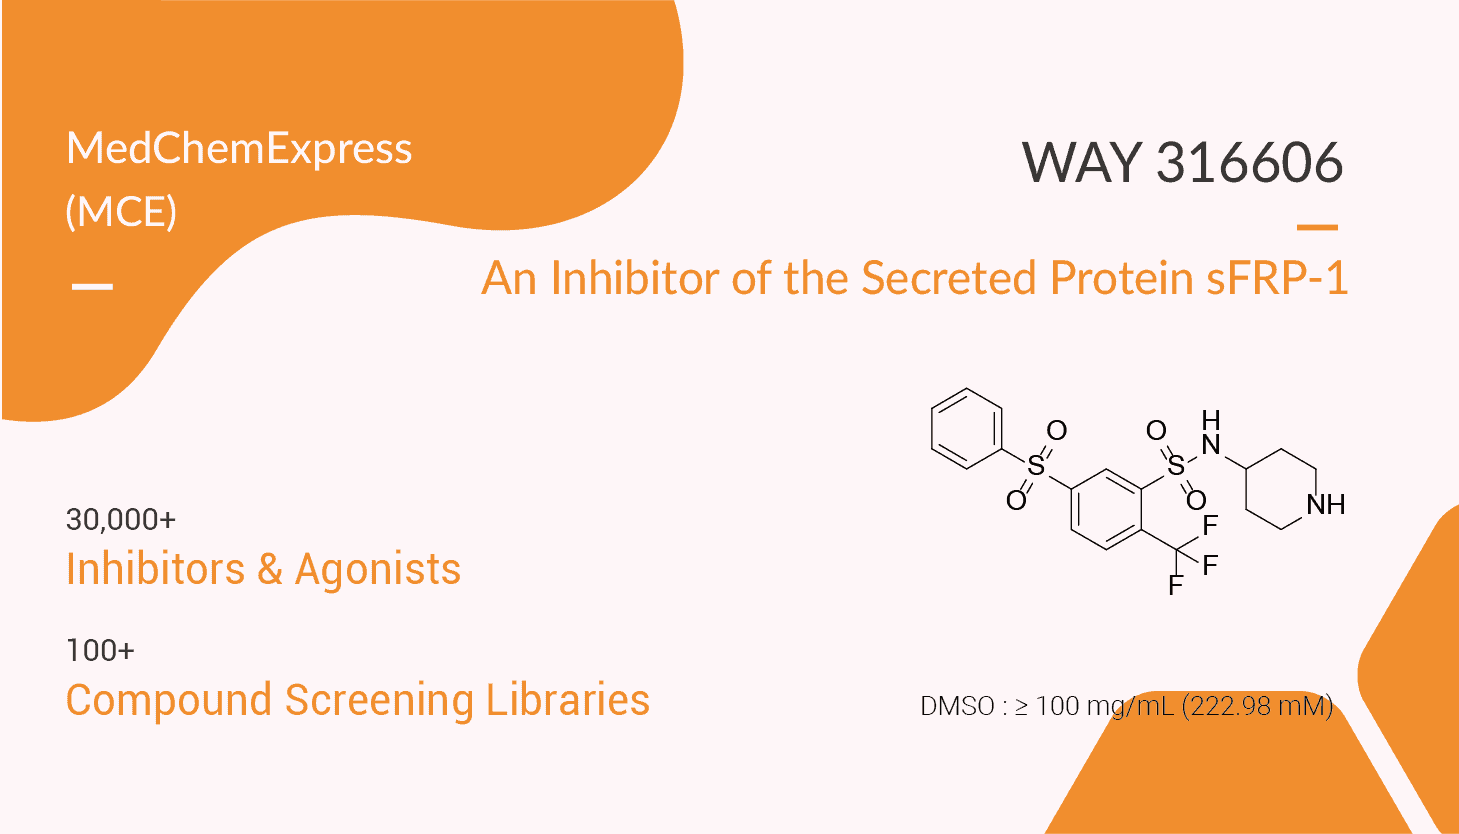 WAY 316606 02 - WAY 316606 is an Inhibitor of the Secreted Protein sFRP-1